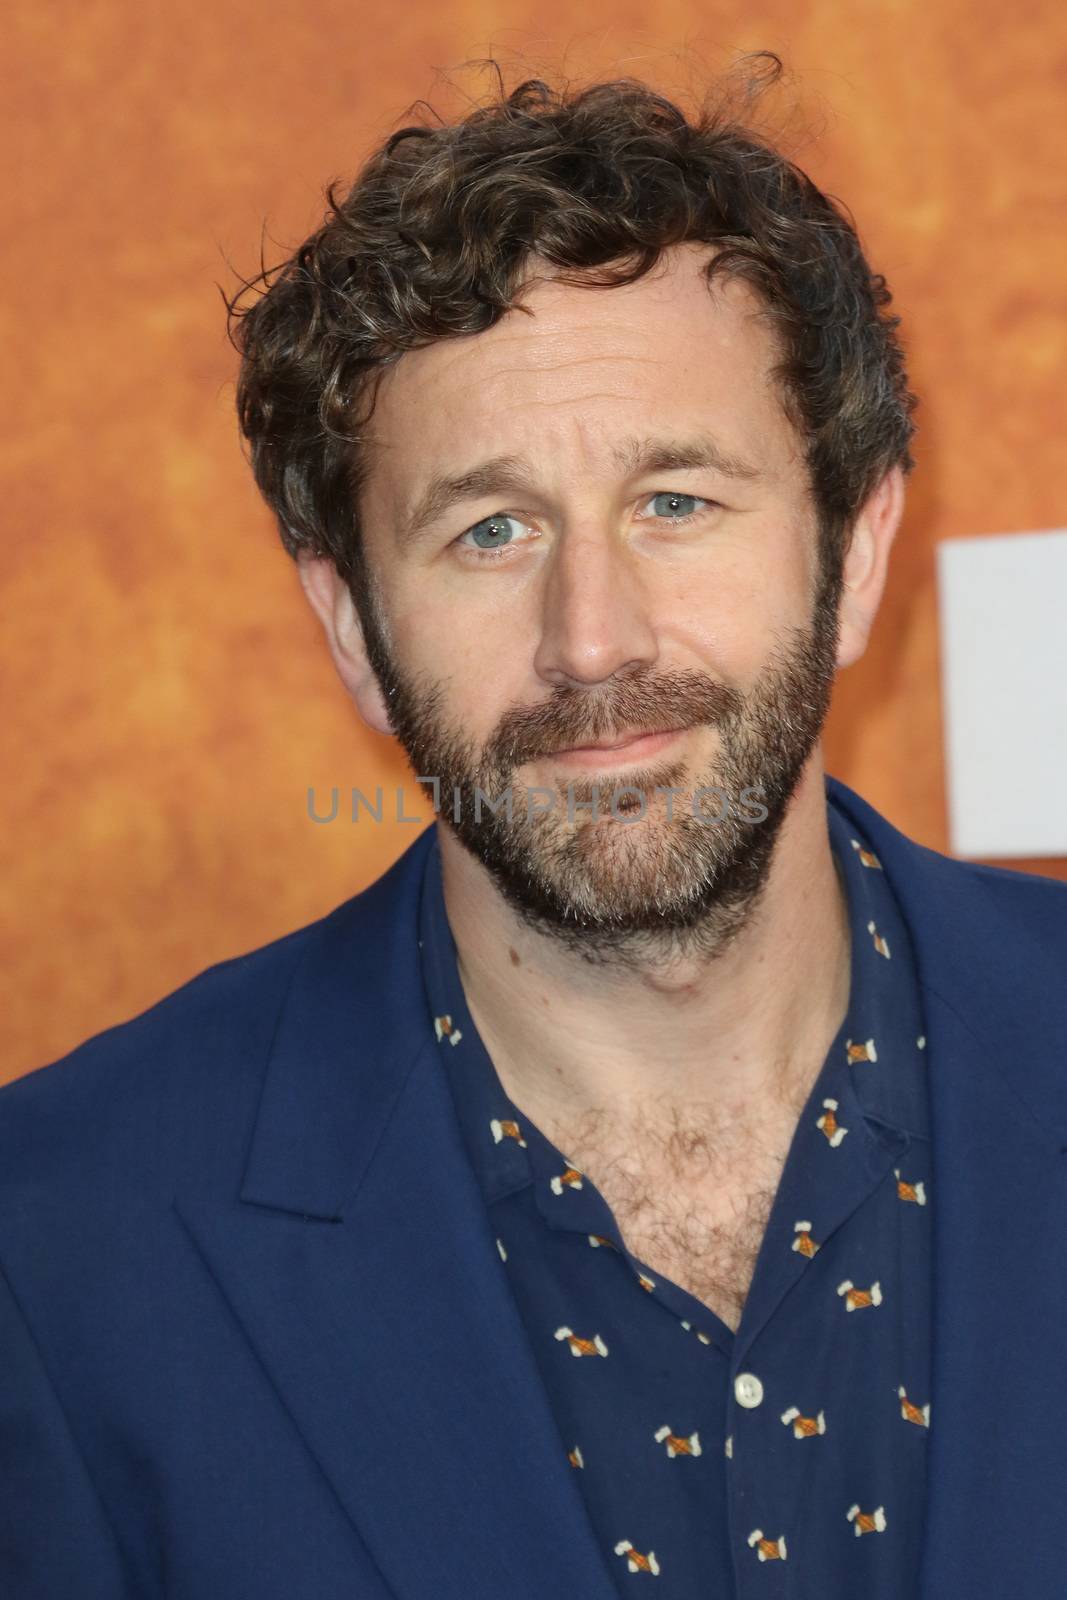 ENGLAND, London: Chris O'Dowd attends the European premiere of The Martian in Leicester Square in London, UK on September 24, 2015